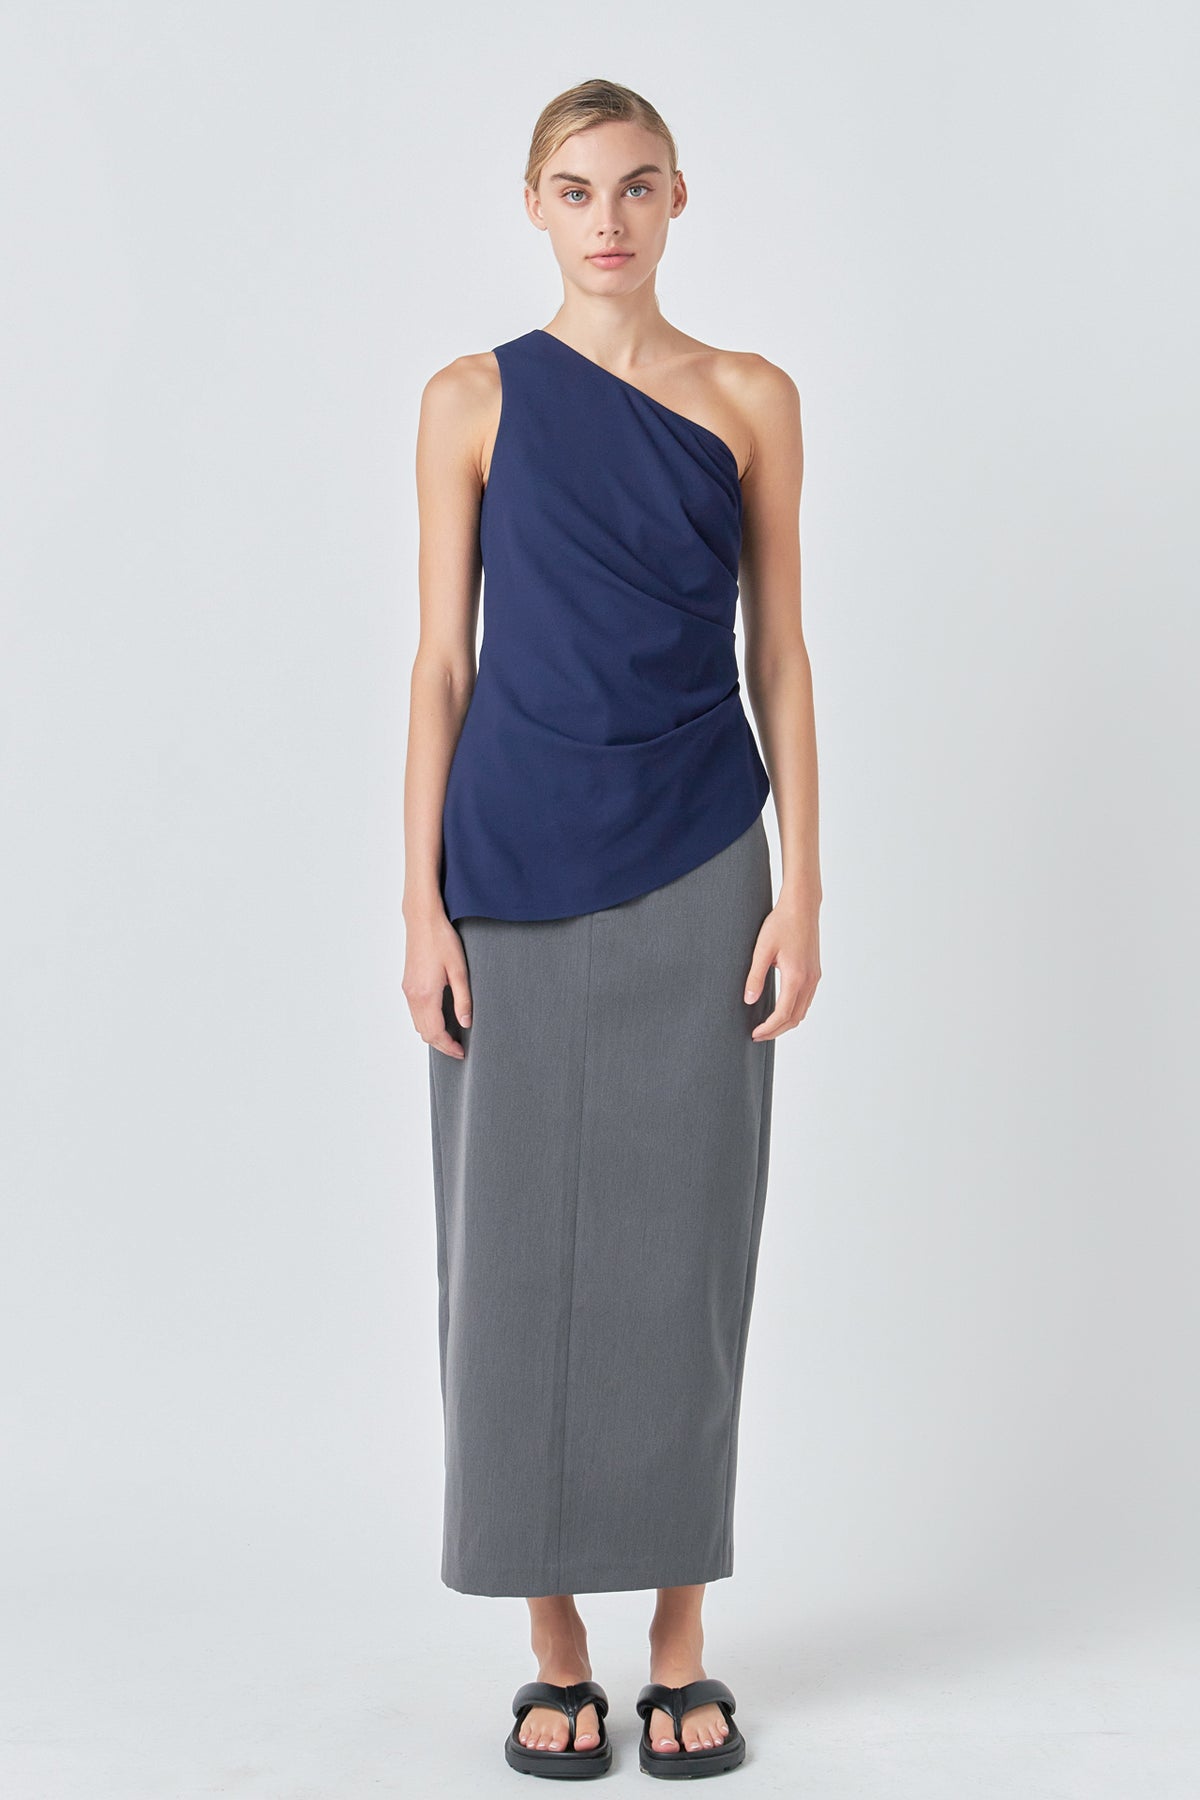 GREY LAB - One Shoulder Ruched Top - TOPS available at Objectrare